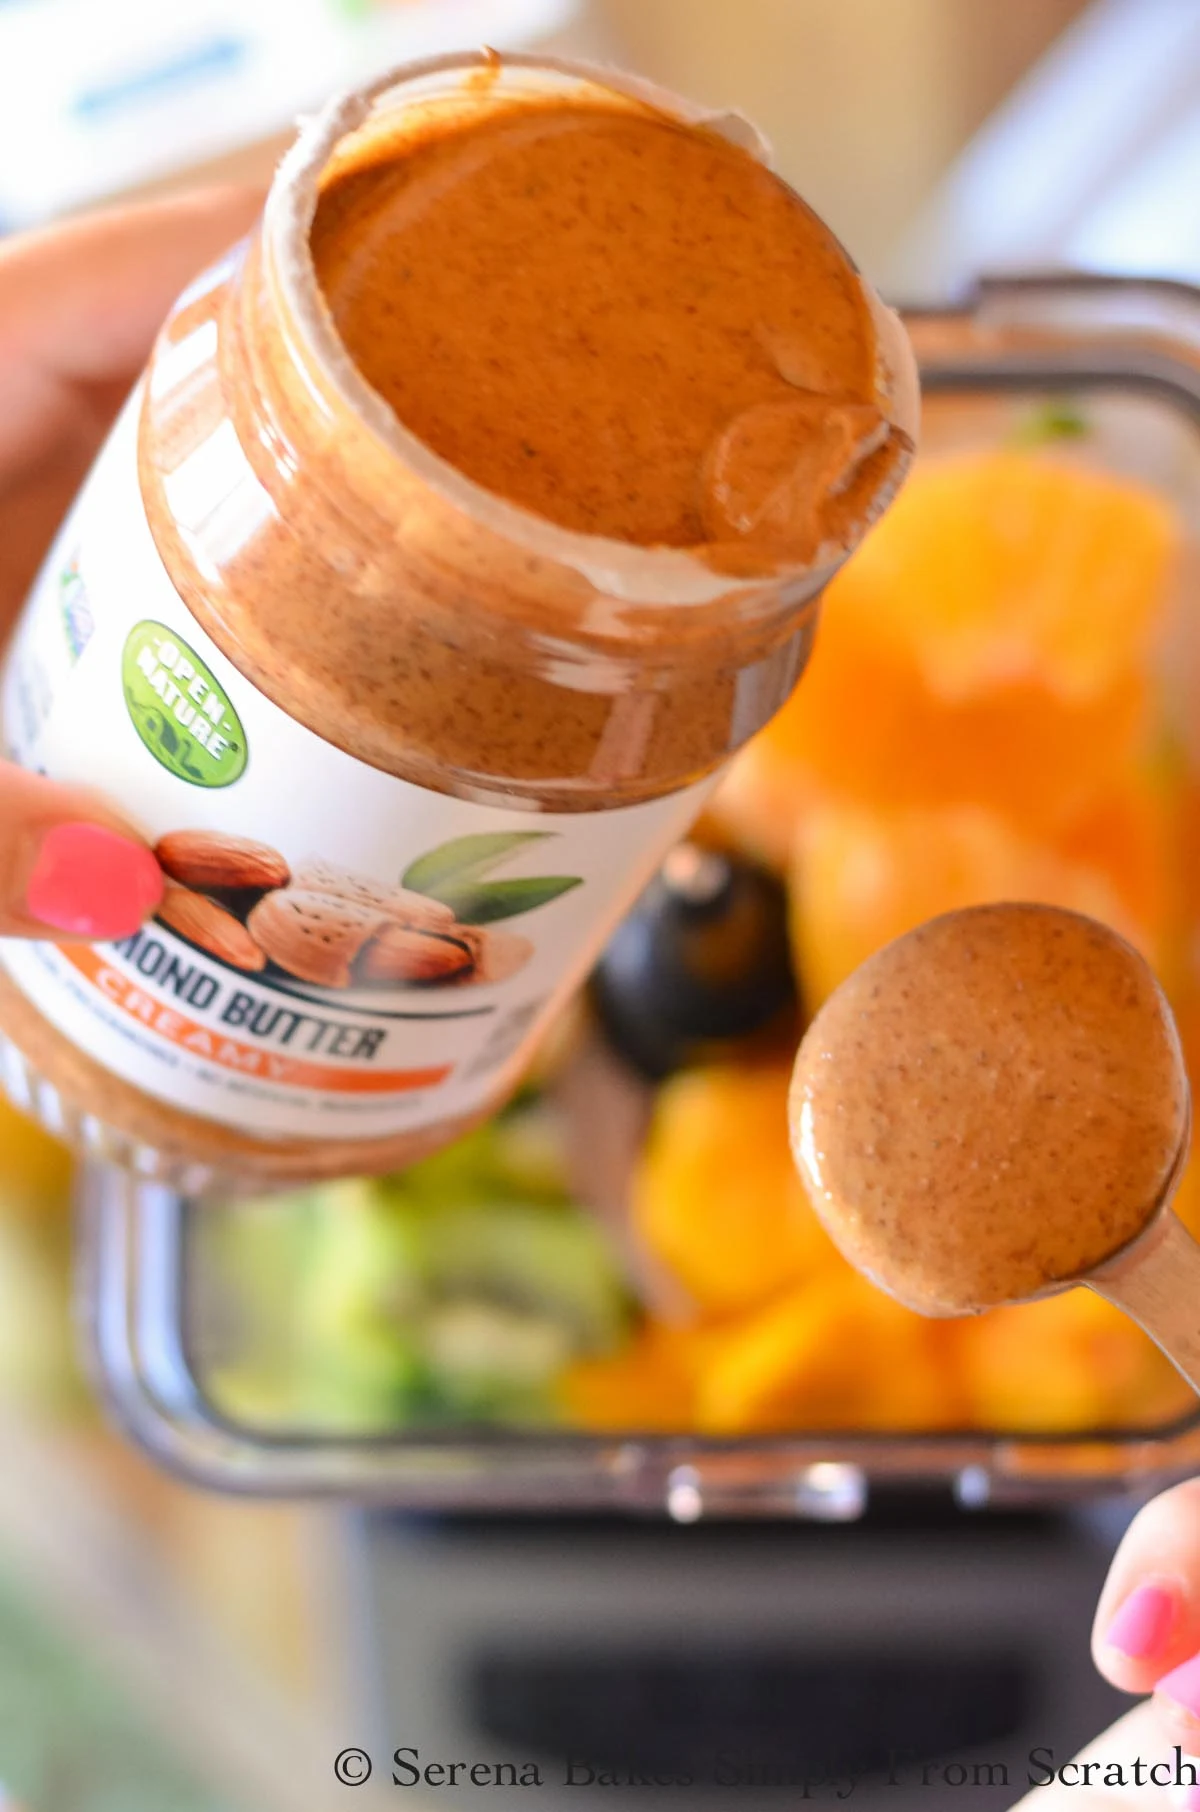 A container of almond butter and a tablespoon filled with almond butter over blender.